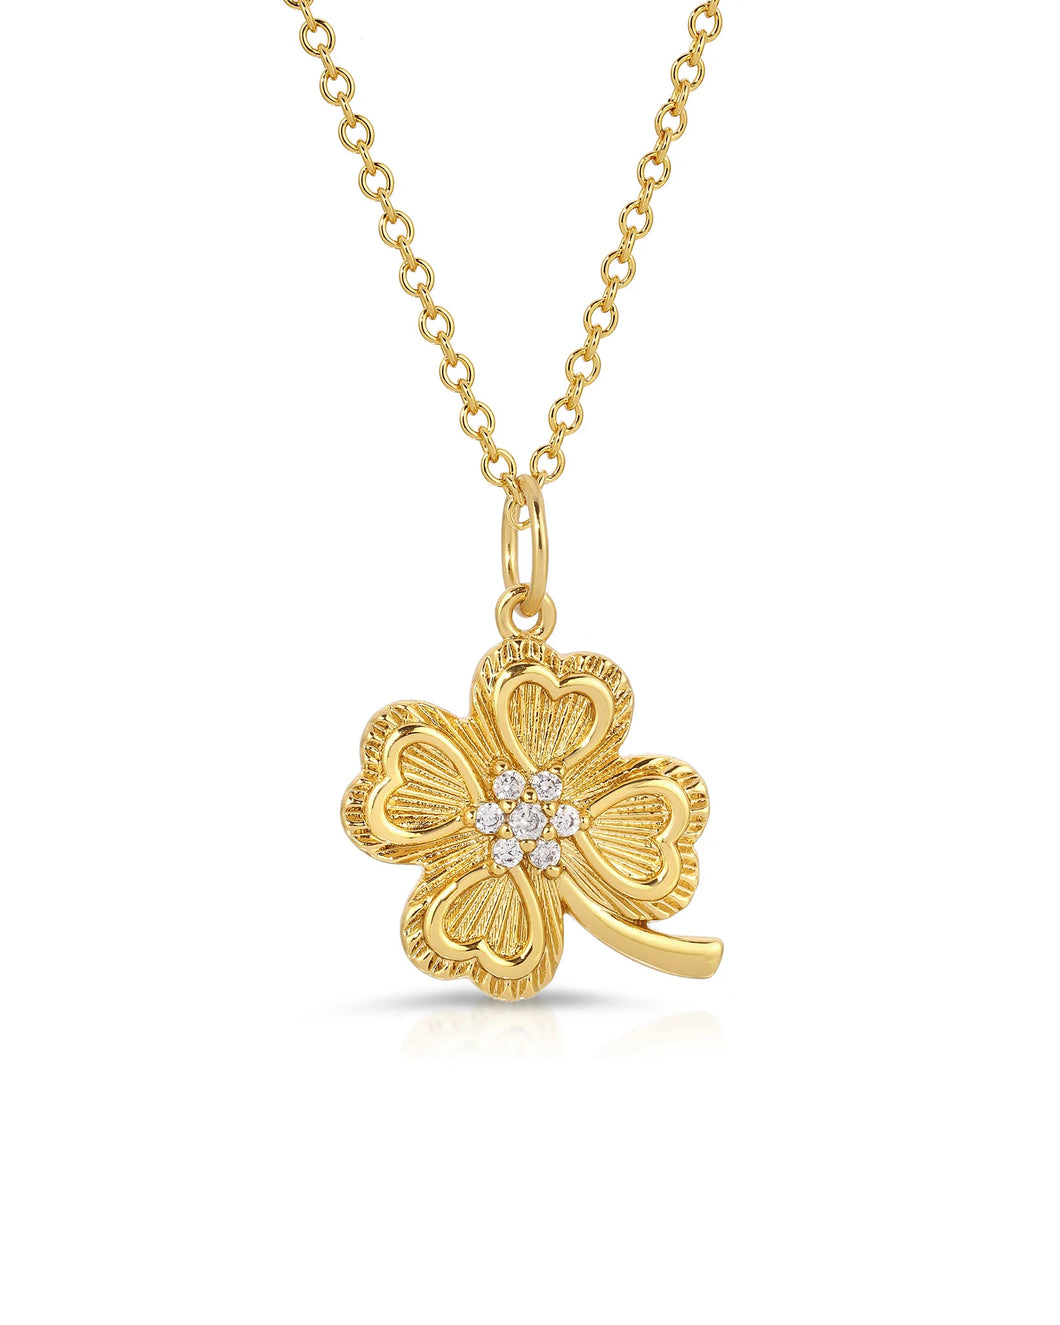 Gold Lucky Clover Necklace with Cubic Zirconia